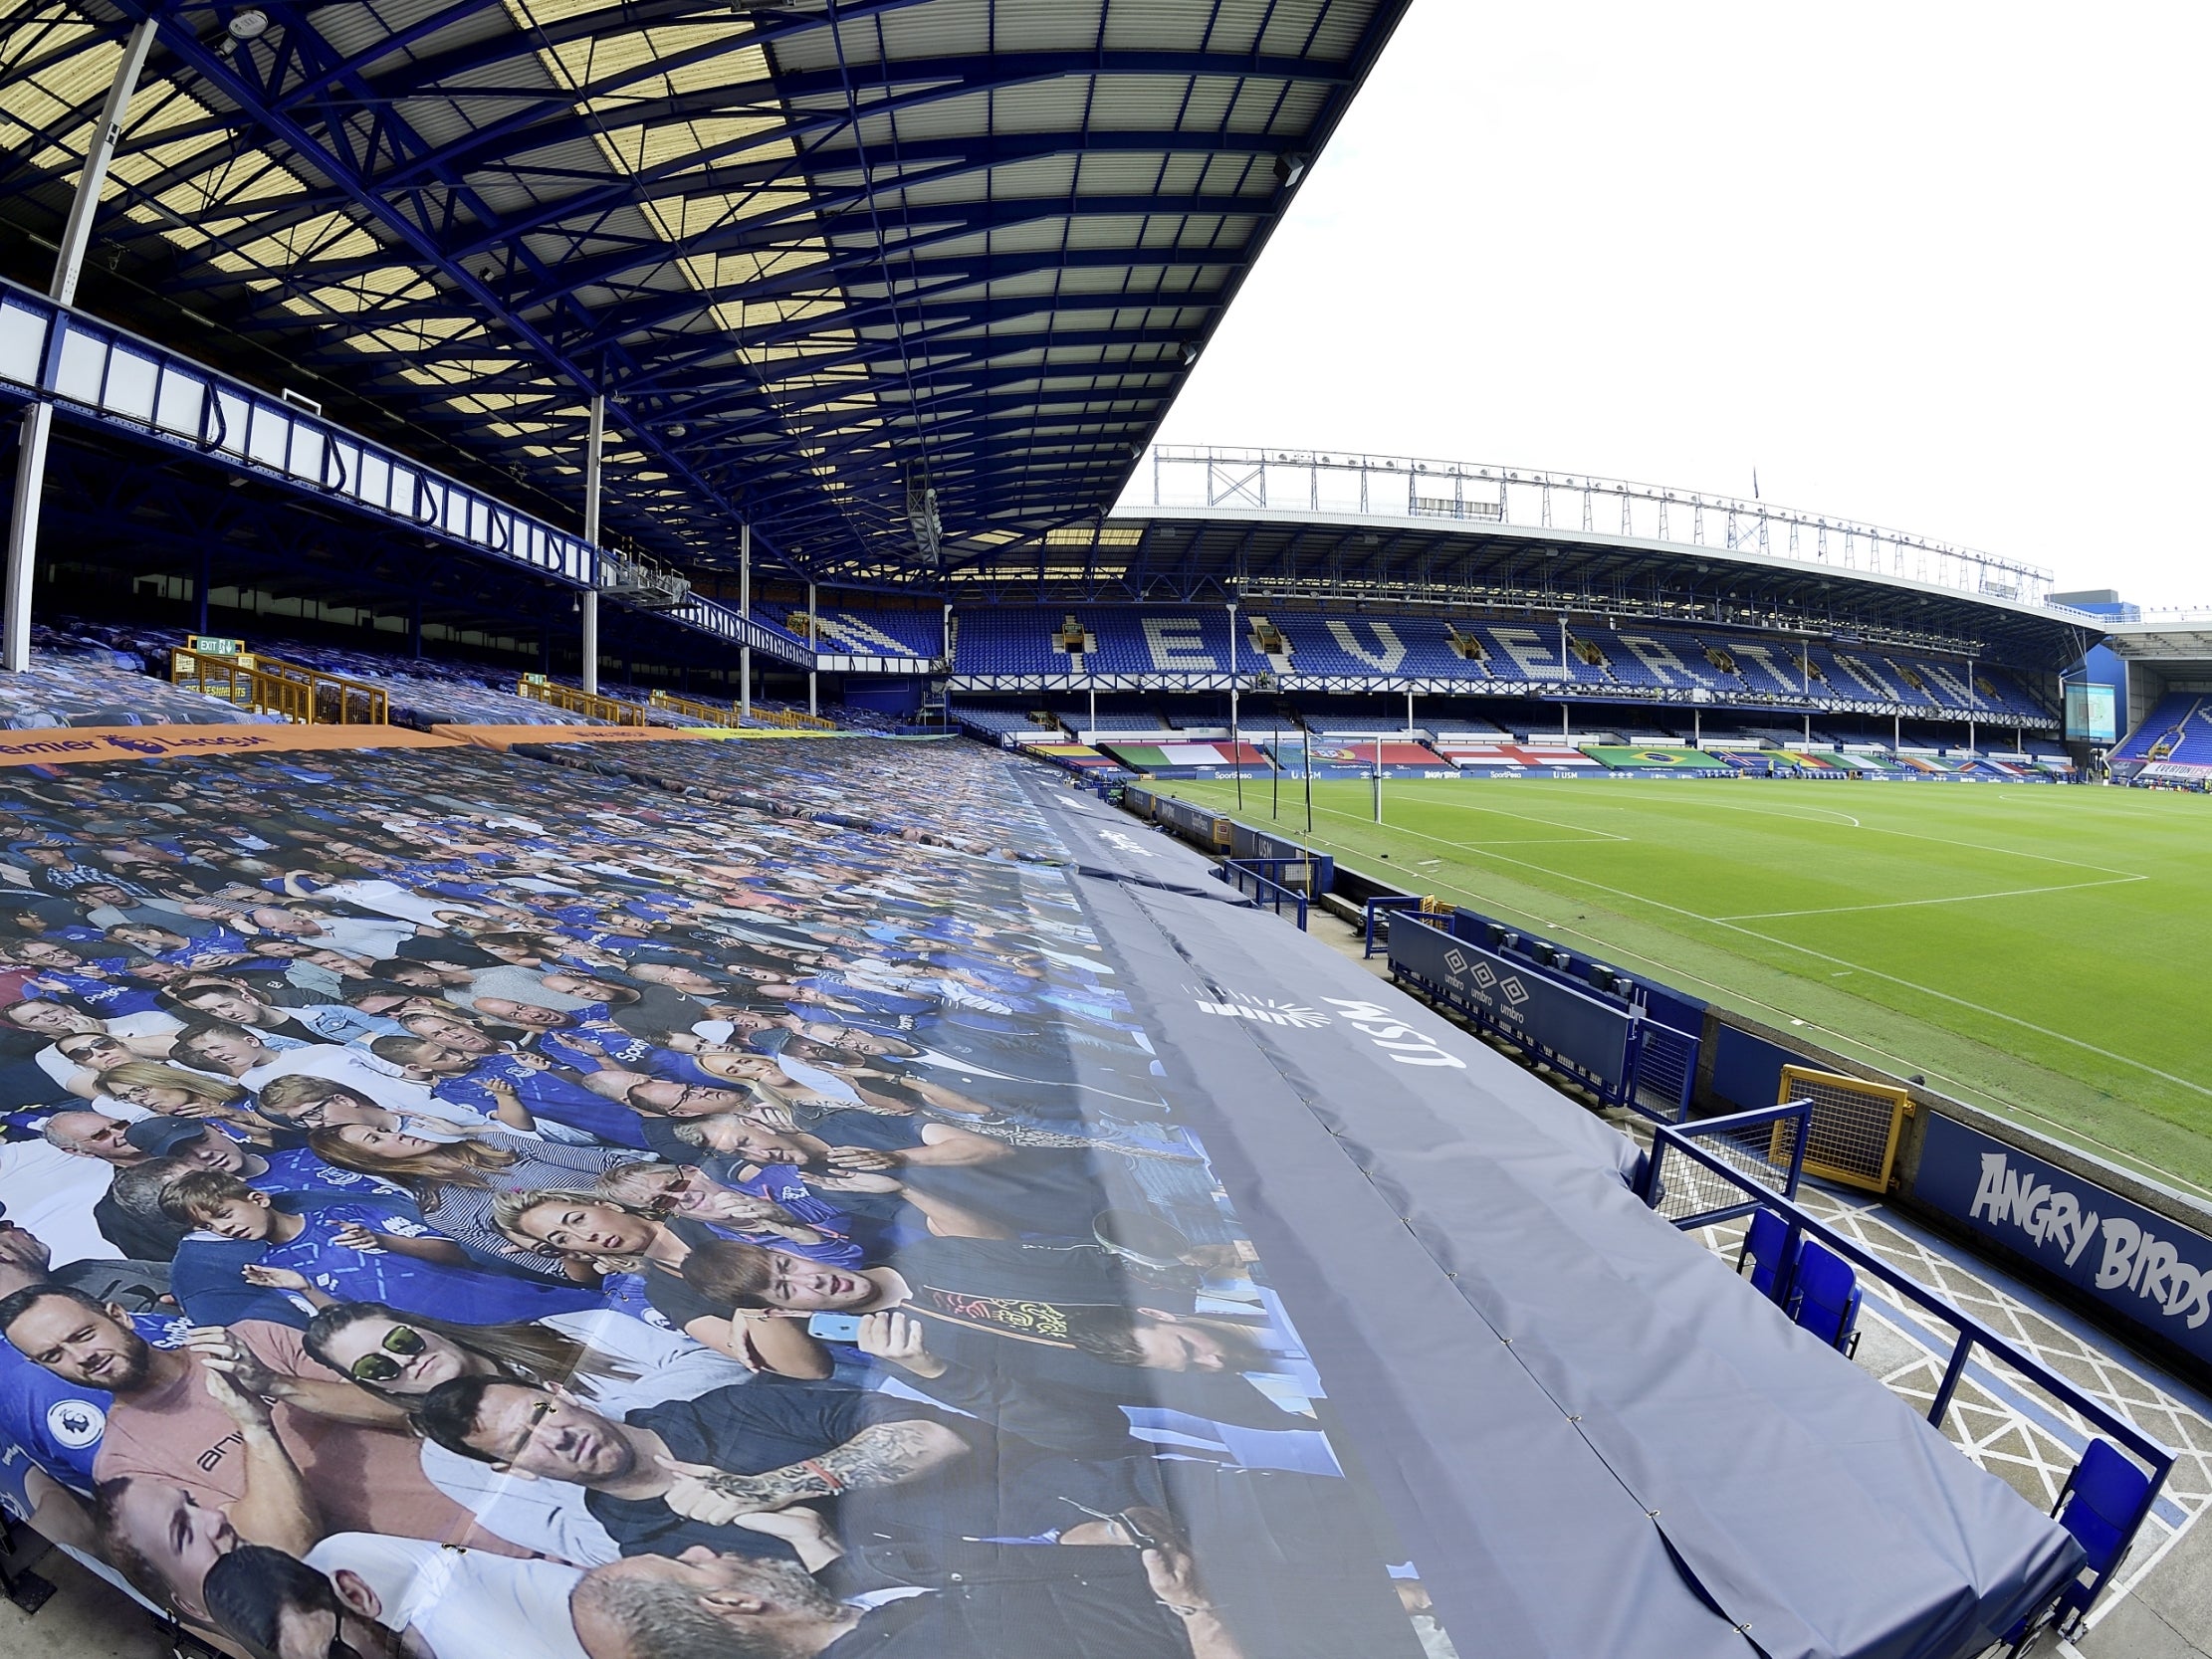 Everton vs Leicester LIVE: Team news, line-ups and more ahead of Premier League fixture today